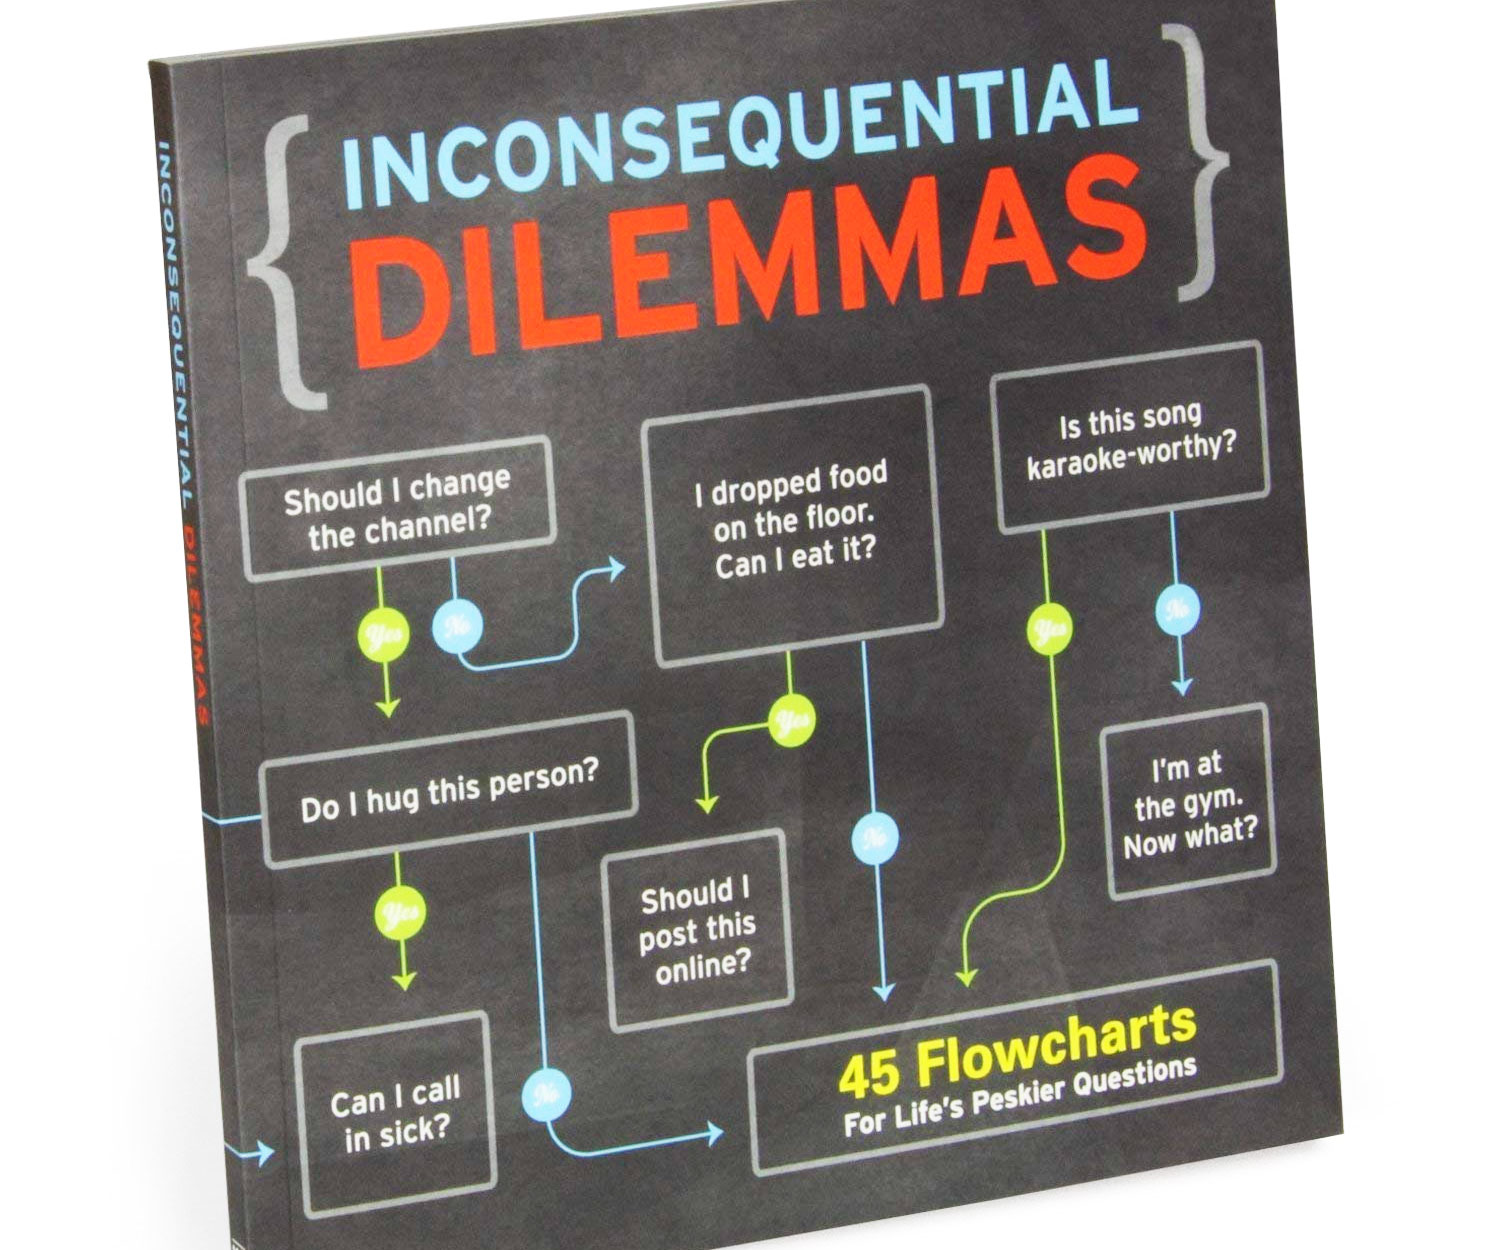 Inconsequential Dilemmas